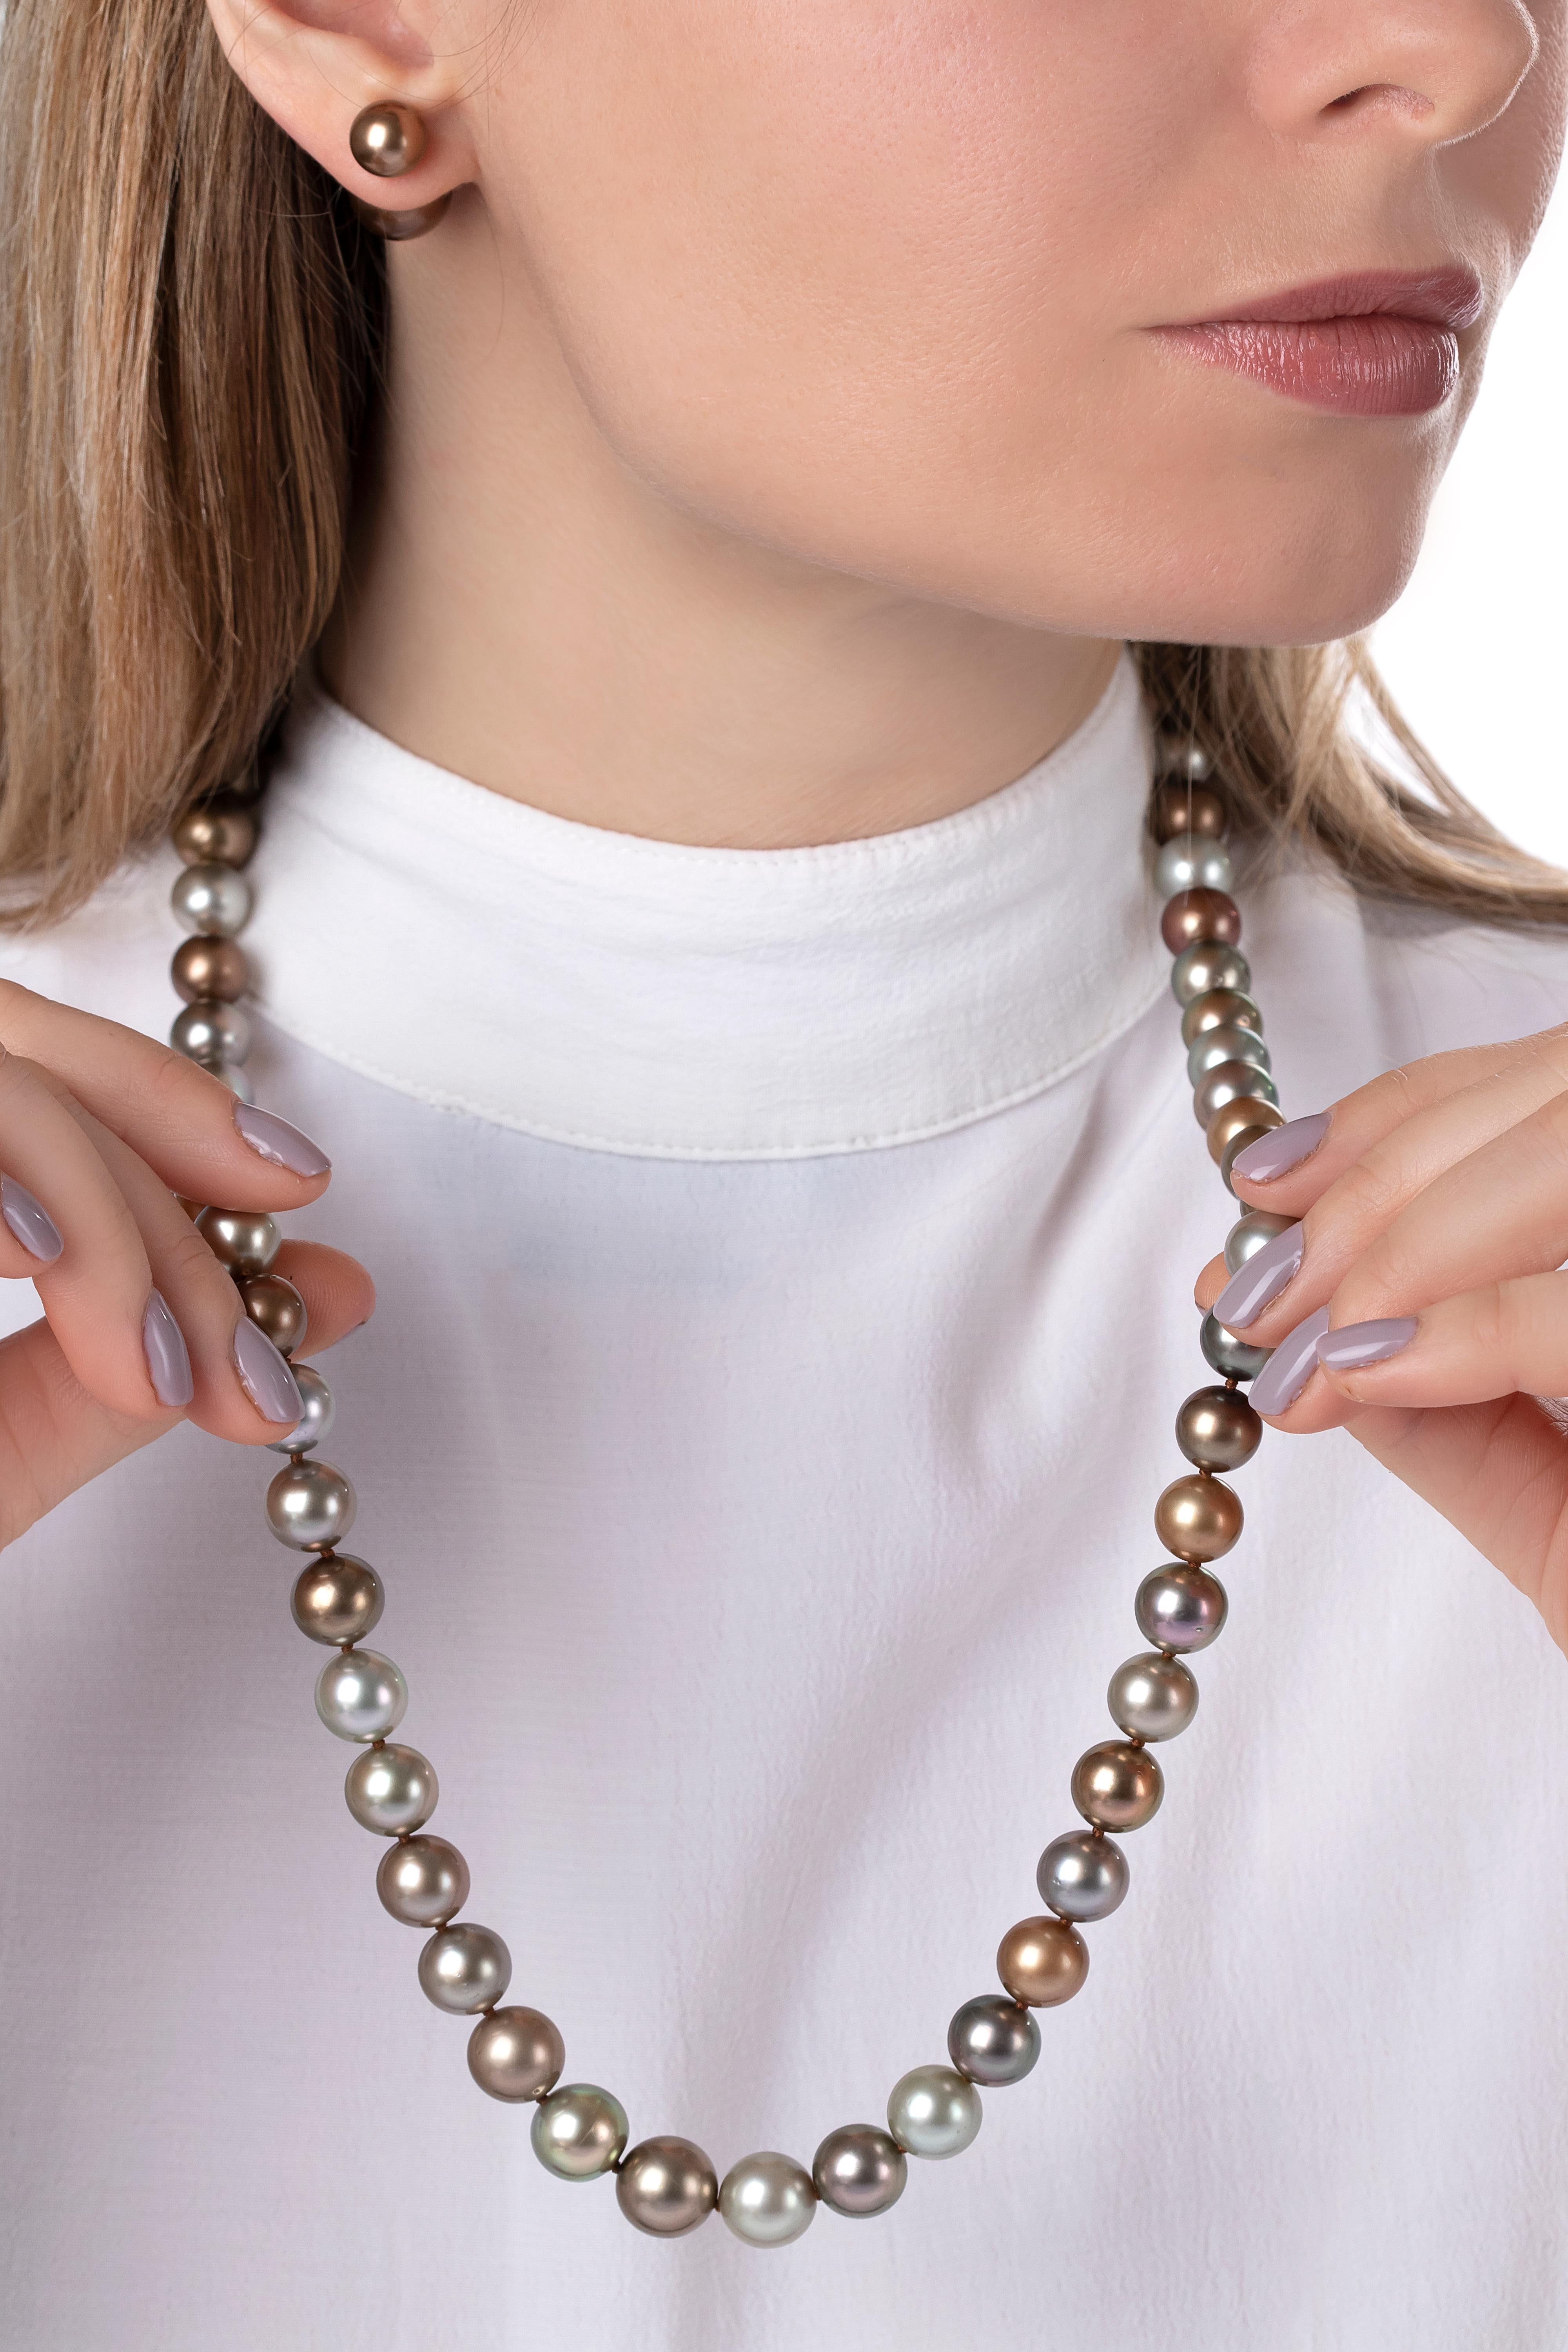 An elegant mix of muted autumnal tones, this long necklace by Yoko London is sure to make a statement with even the most simple of outfits. Each pearl has been hand selected by our artisans to deliver a harmonious sequence of greys, khakis, beige